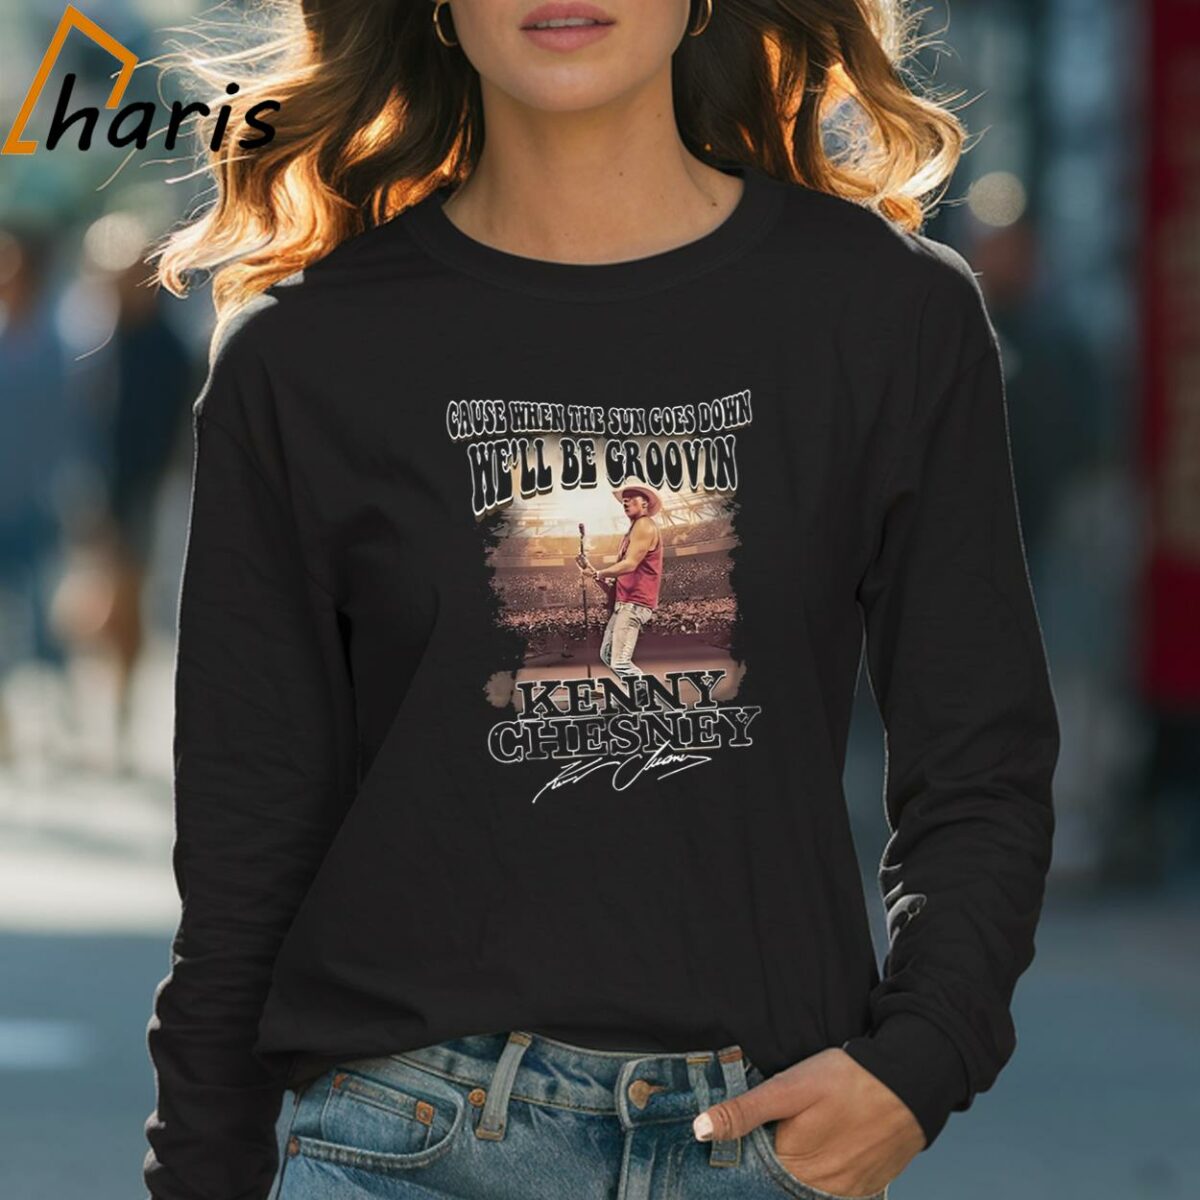 Kenny Chesney Live Well Be Groovin When The Sun Goes Down Well Be Groovin T shirt 4 Long sleeve shirt